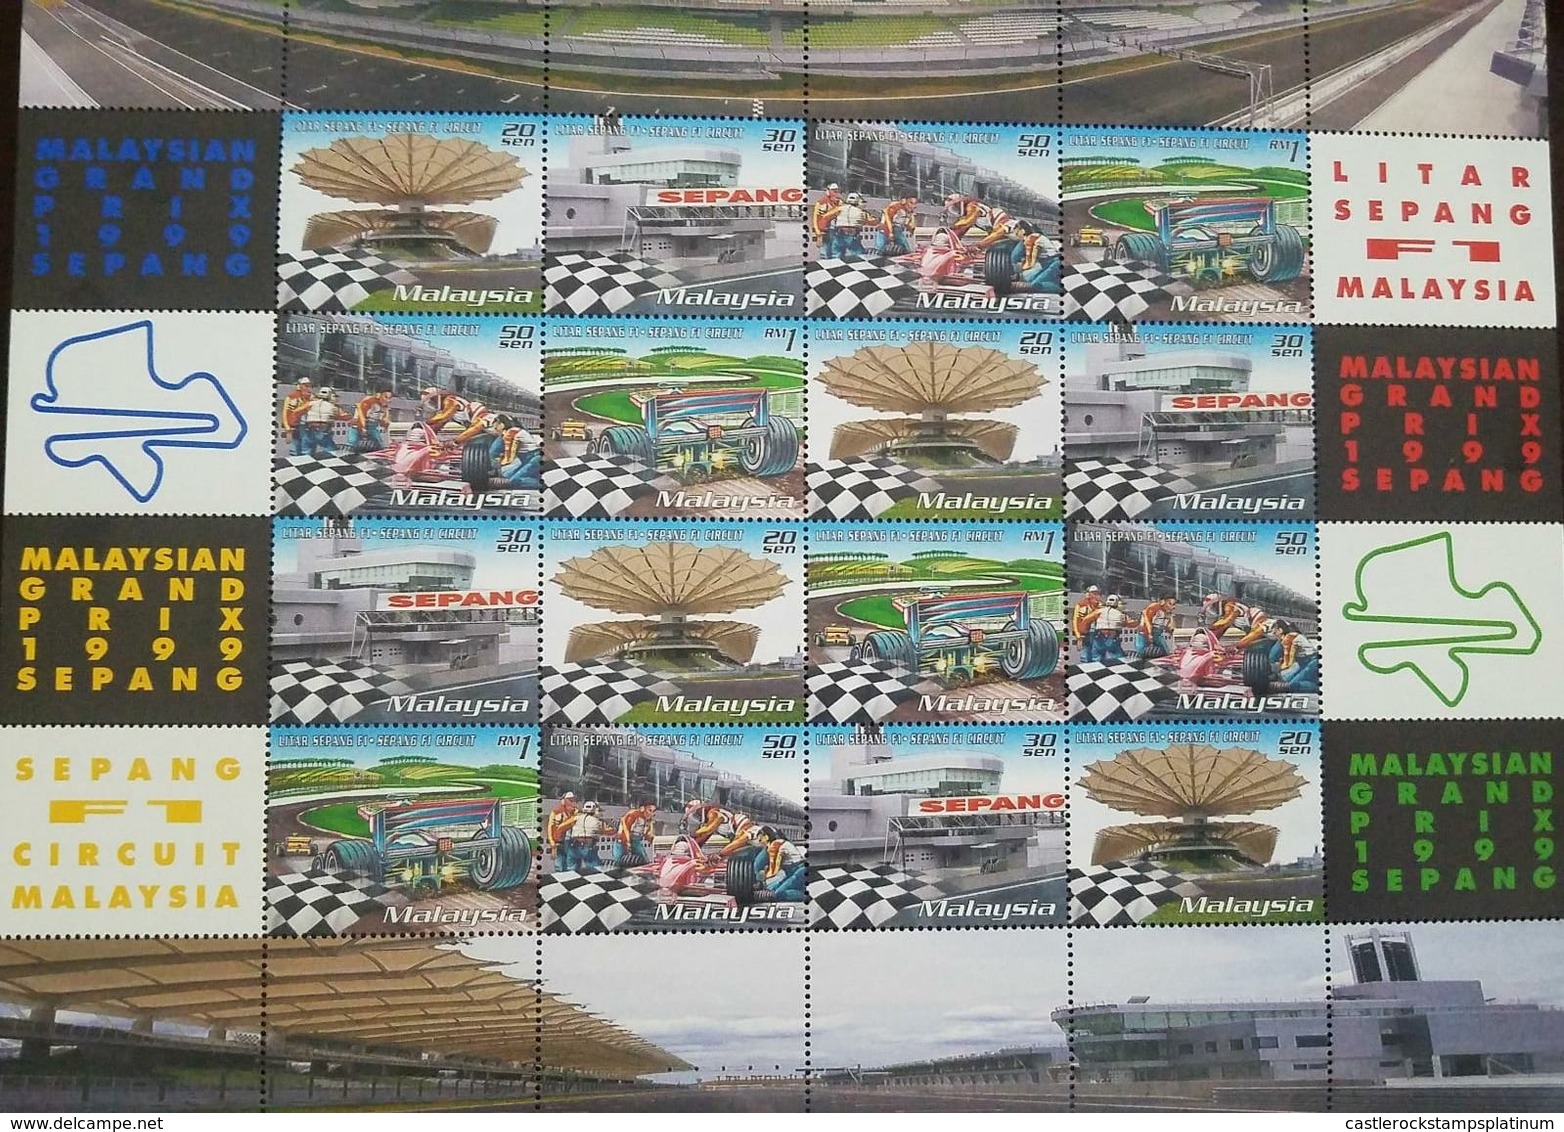 O) 1999 MALAYSIA, GRAND PRIX -RACING HEMETS-CANOPY OVER TRACK'S STANDS-STANDS-CAR ON TRACK-SIDE VIEW OF CAR, SHEET MNH - Malaysia (1964-...)